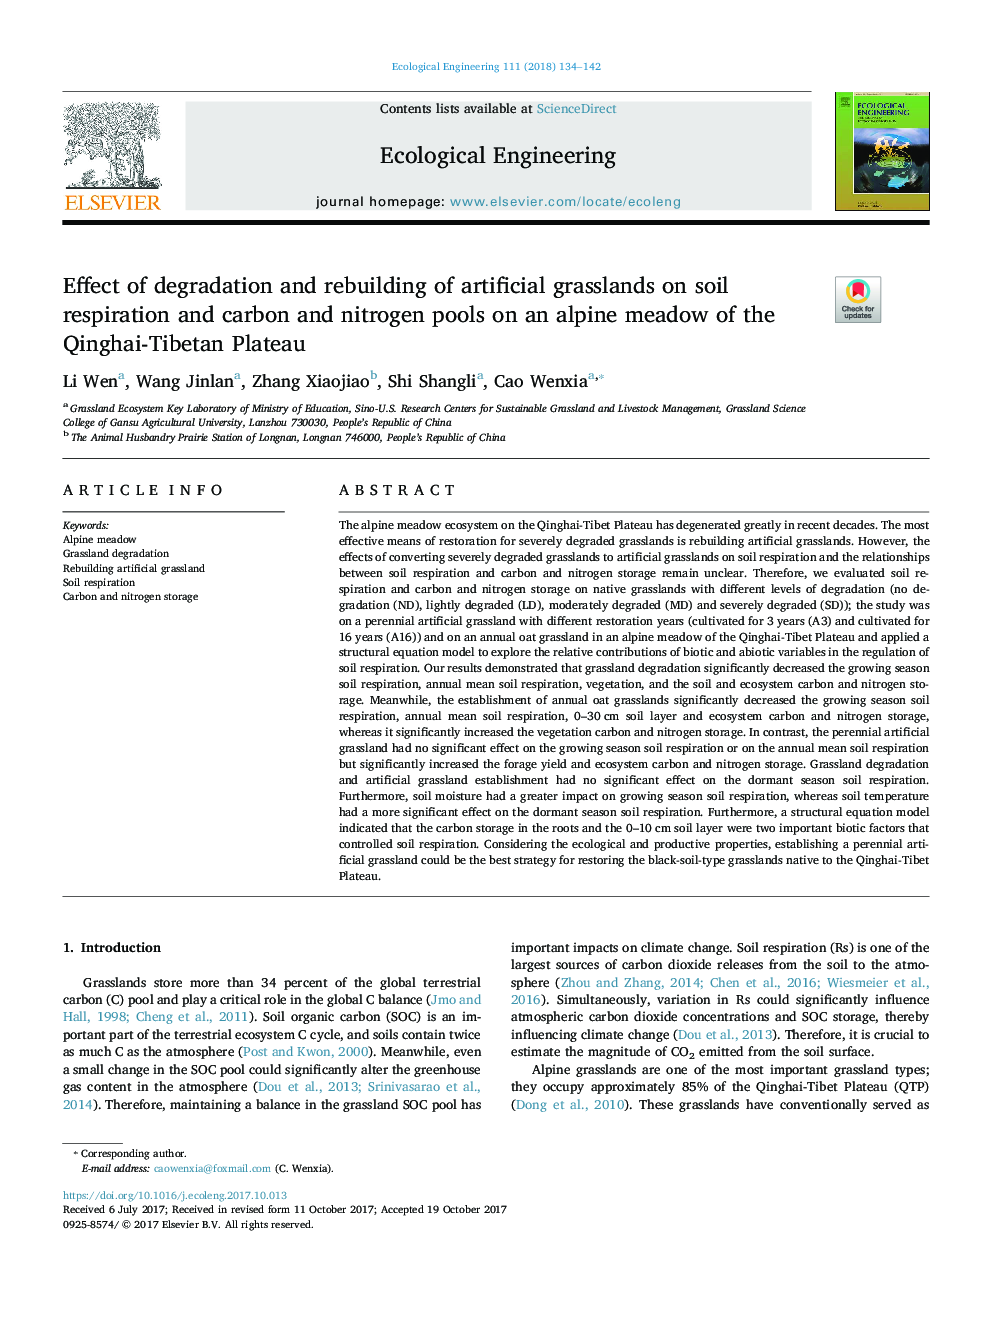 Effect of degradation and rebuilding of artificial grasslands on soil respiration and carbon and nitrogen pools on an alpine meadow of the Qinghai-Tibetan Plateau